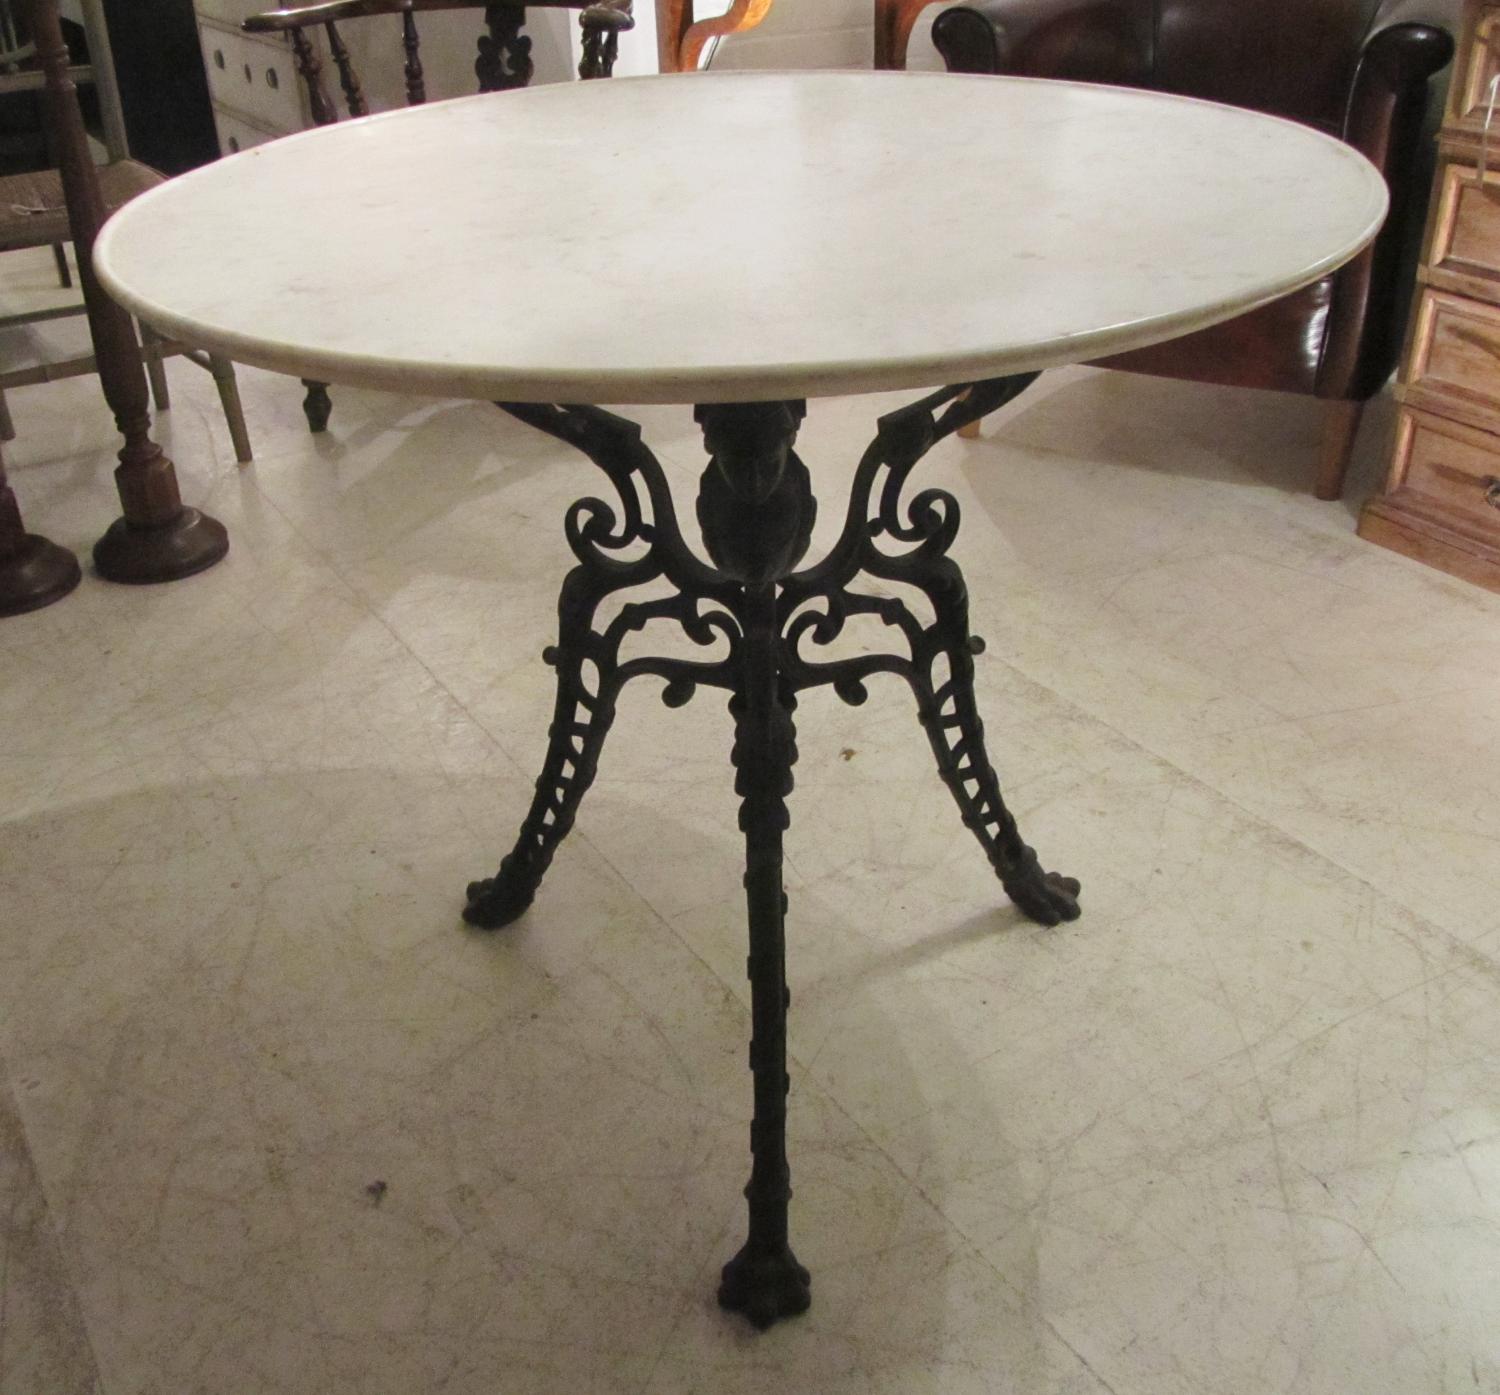 A cast iron and marble table